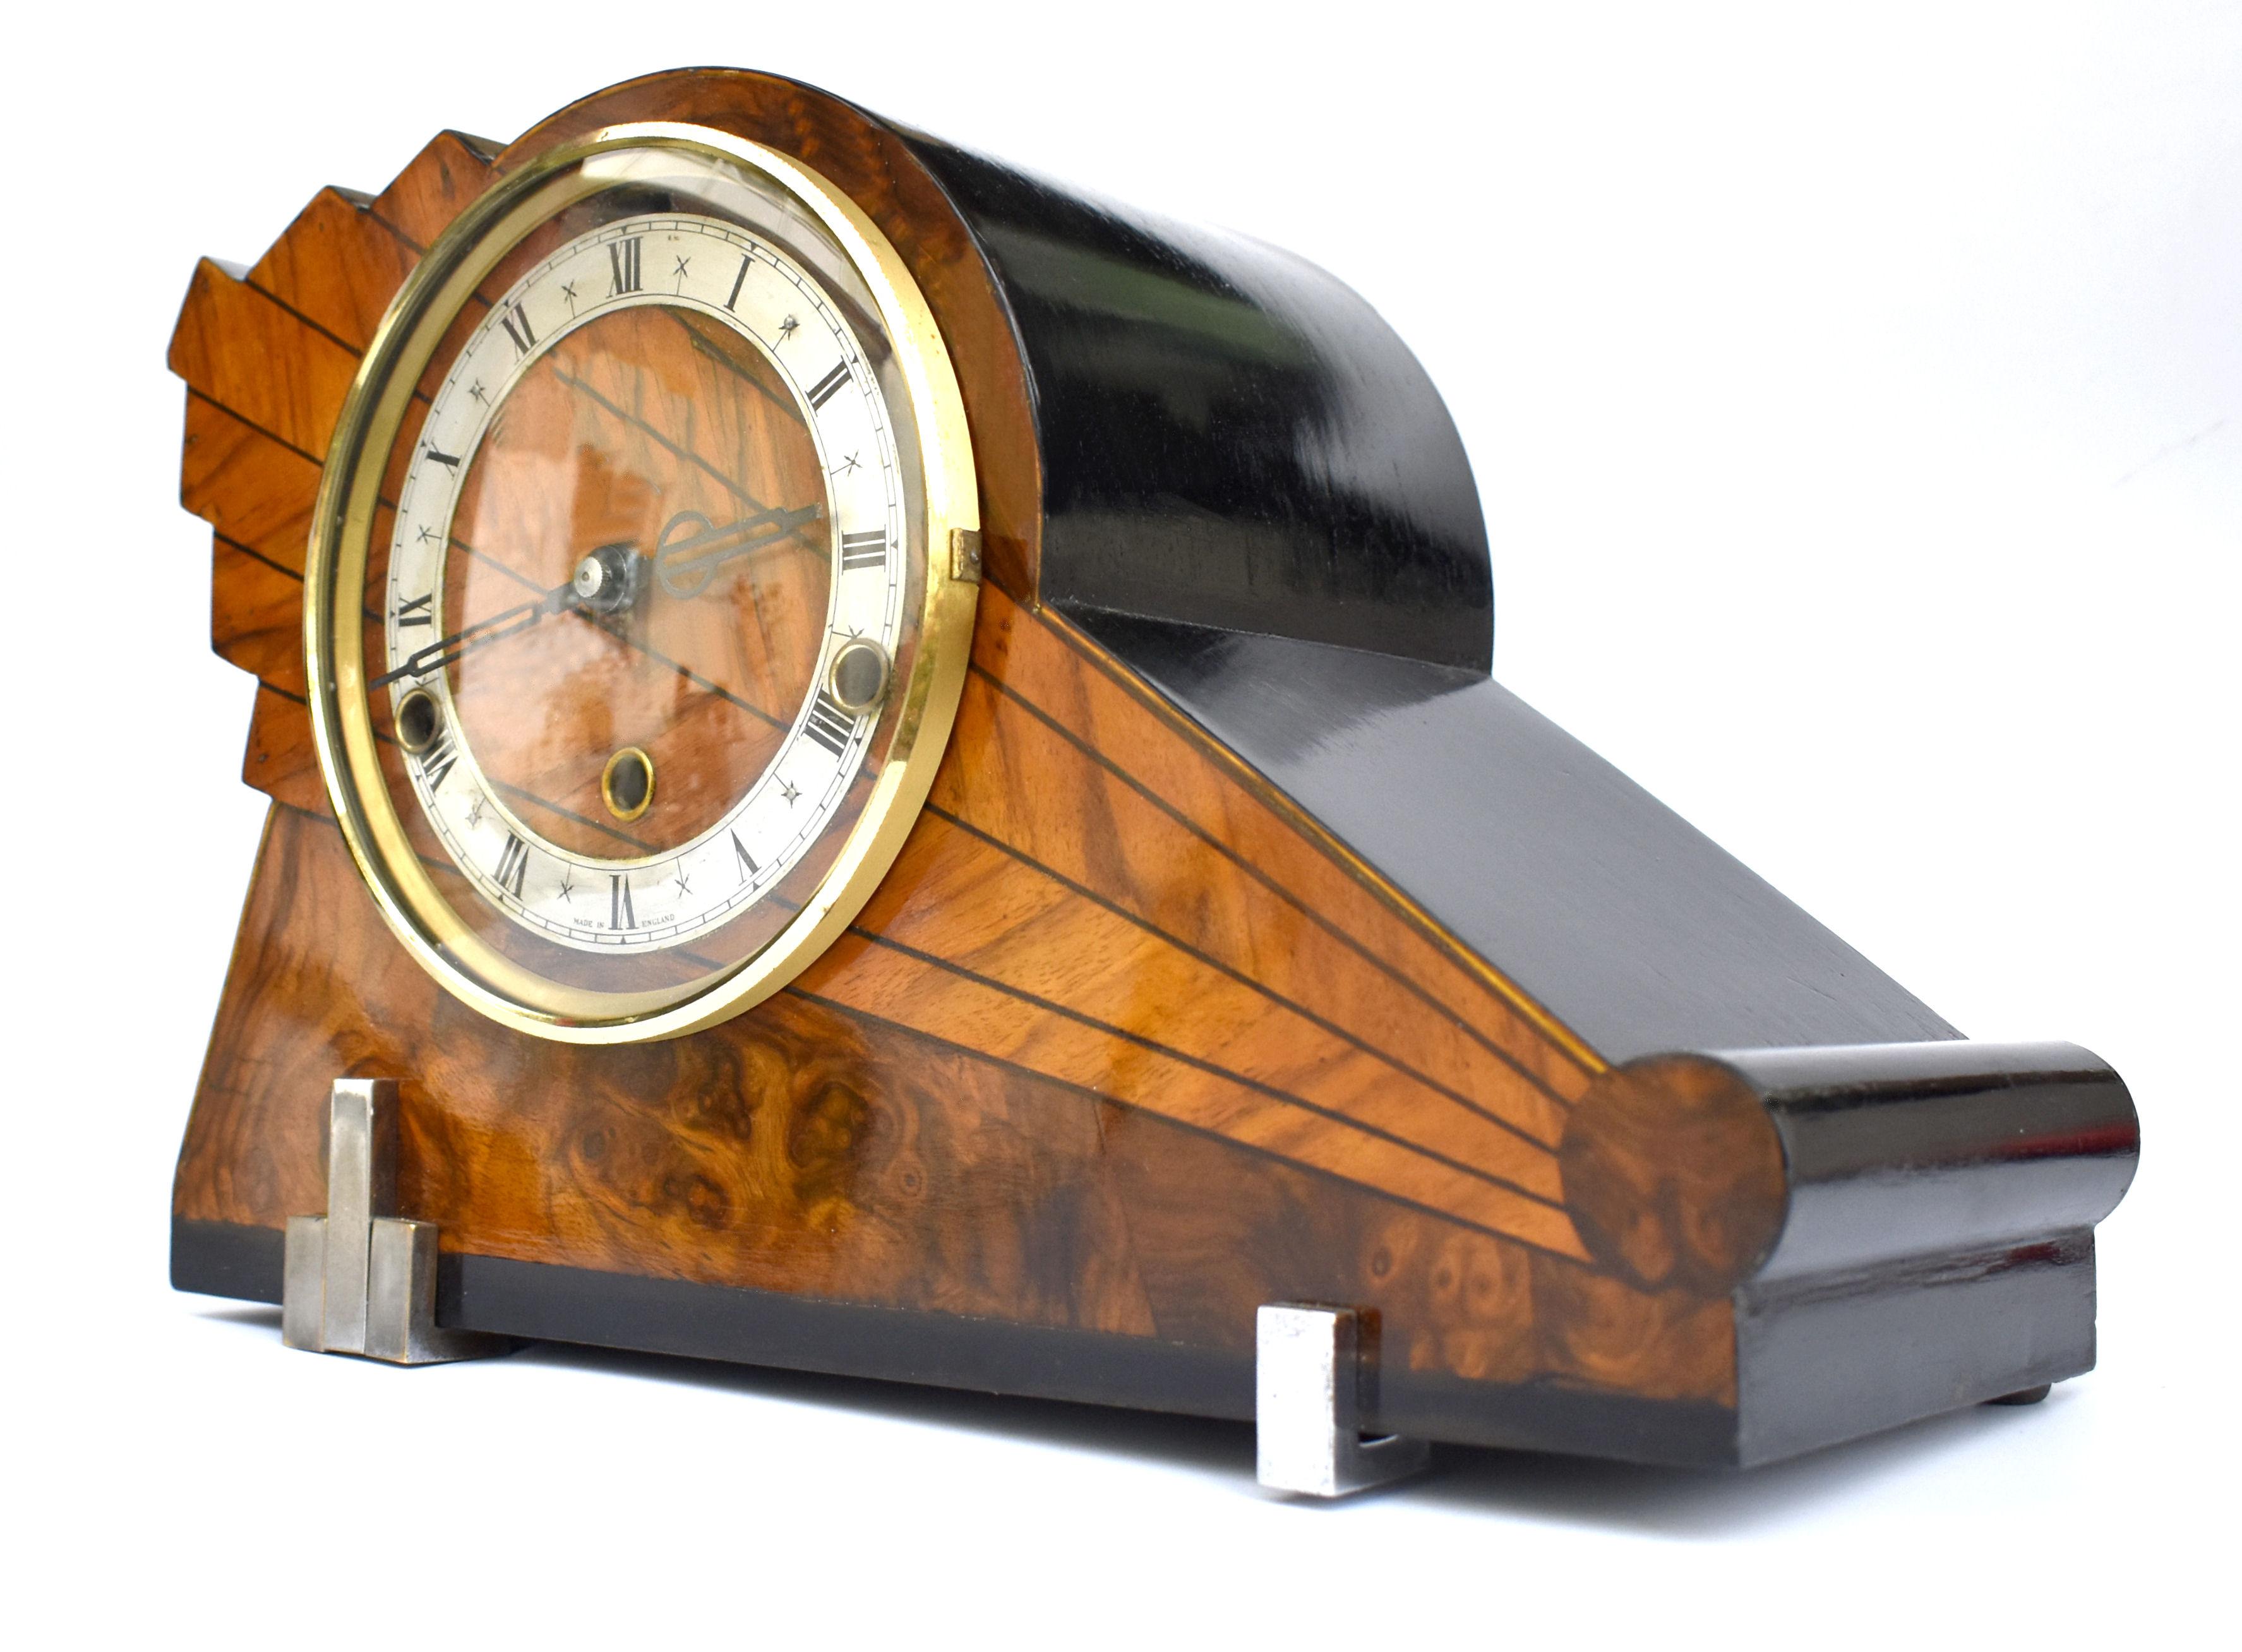 For your consideration is this very stylish 1930's Art Deco Westminster chime clock made in England. Multi toned walnut veneers with ebonised surround and a with geometric lightening shape to form the case this clock really does make a statement .